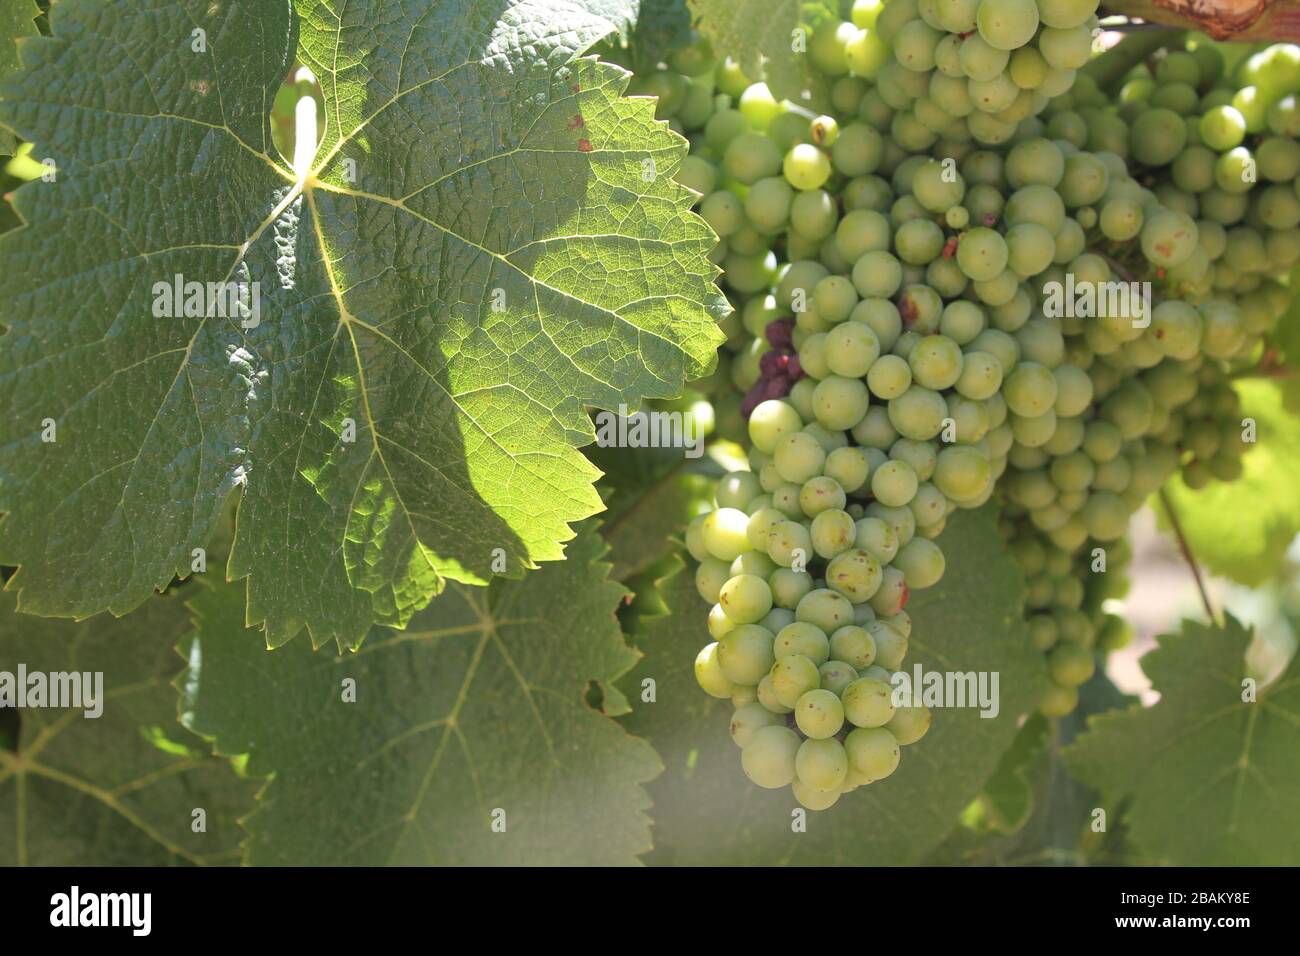 Sunny and green vineyard in South Australia Stock Photo